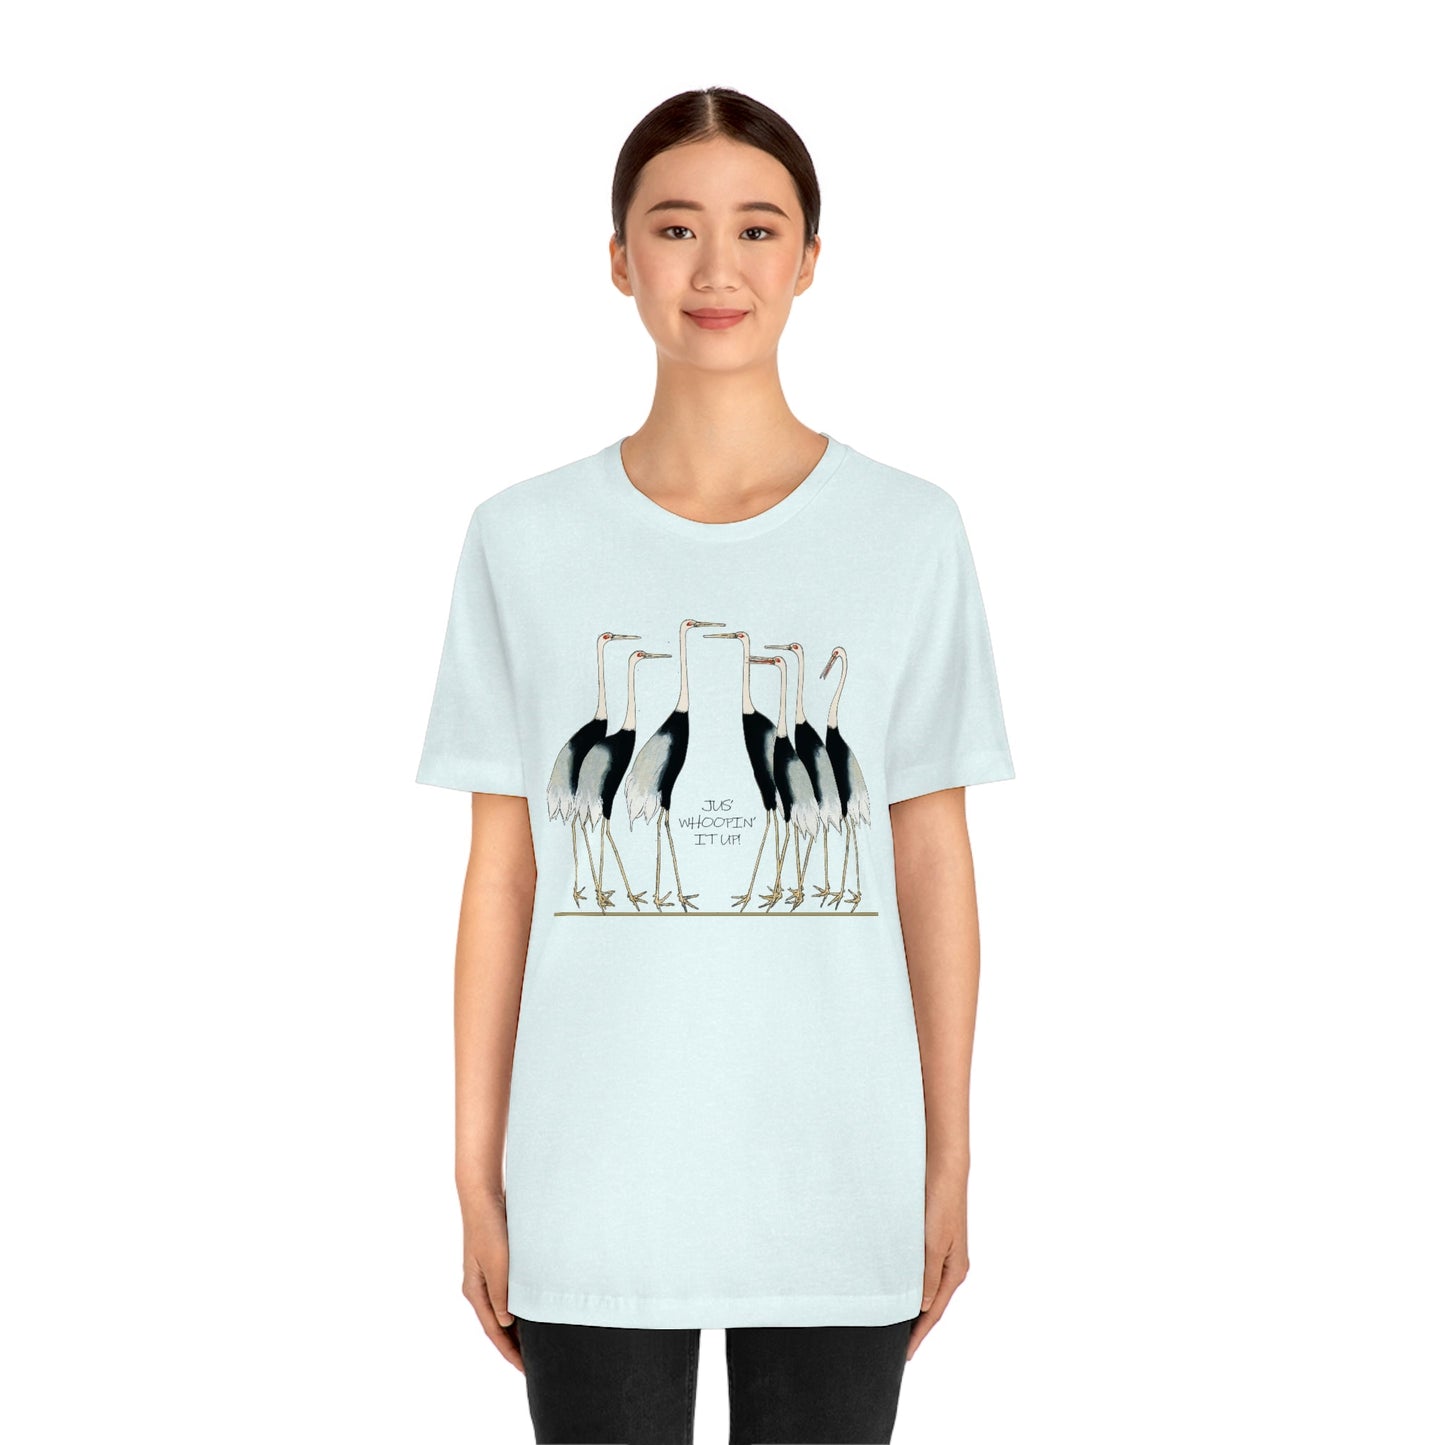 Just Whopping It Up - Whooping Crane - Jersey Short Sleeve Tee